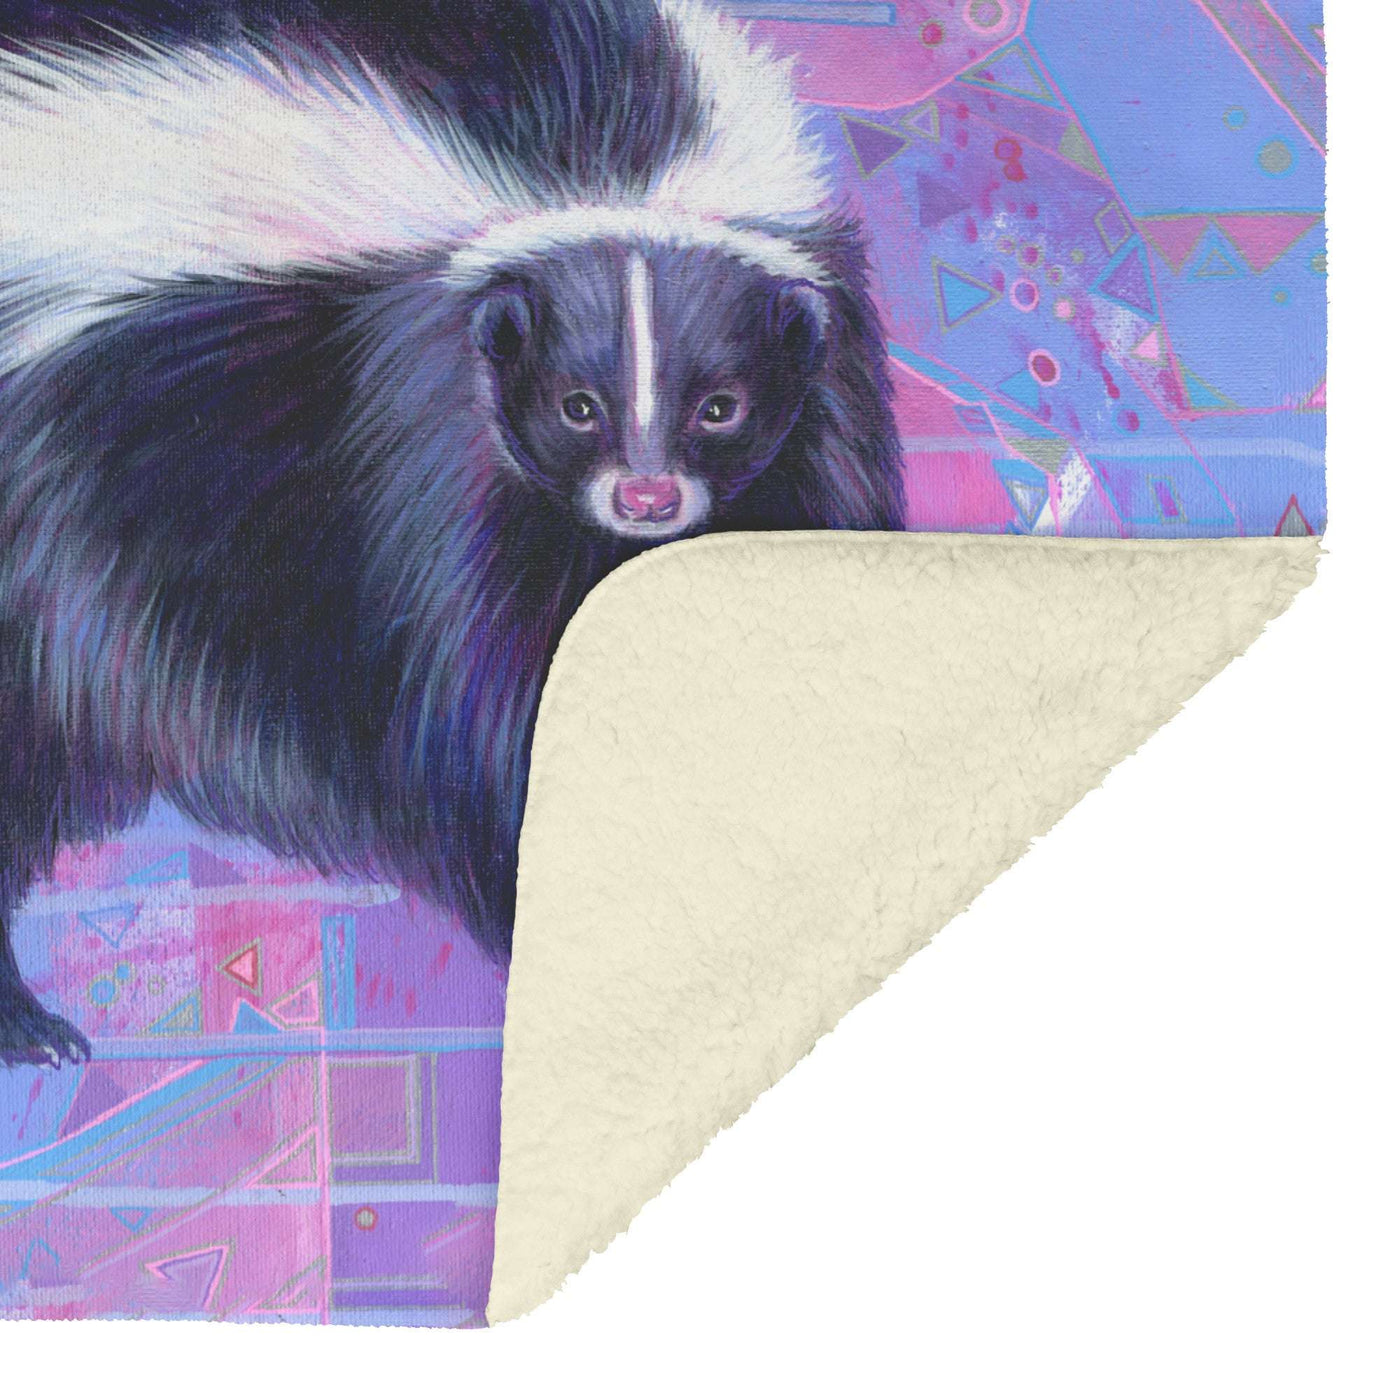 A Skunk Blanket illustrated with vibrant and detailed textures against a colorful geometric background, partially hidden behind the folded corner of the fleece blanket